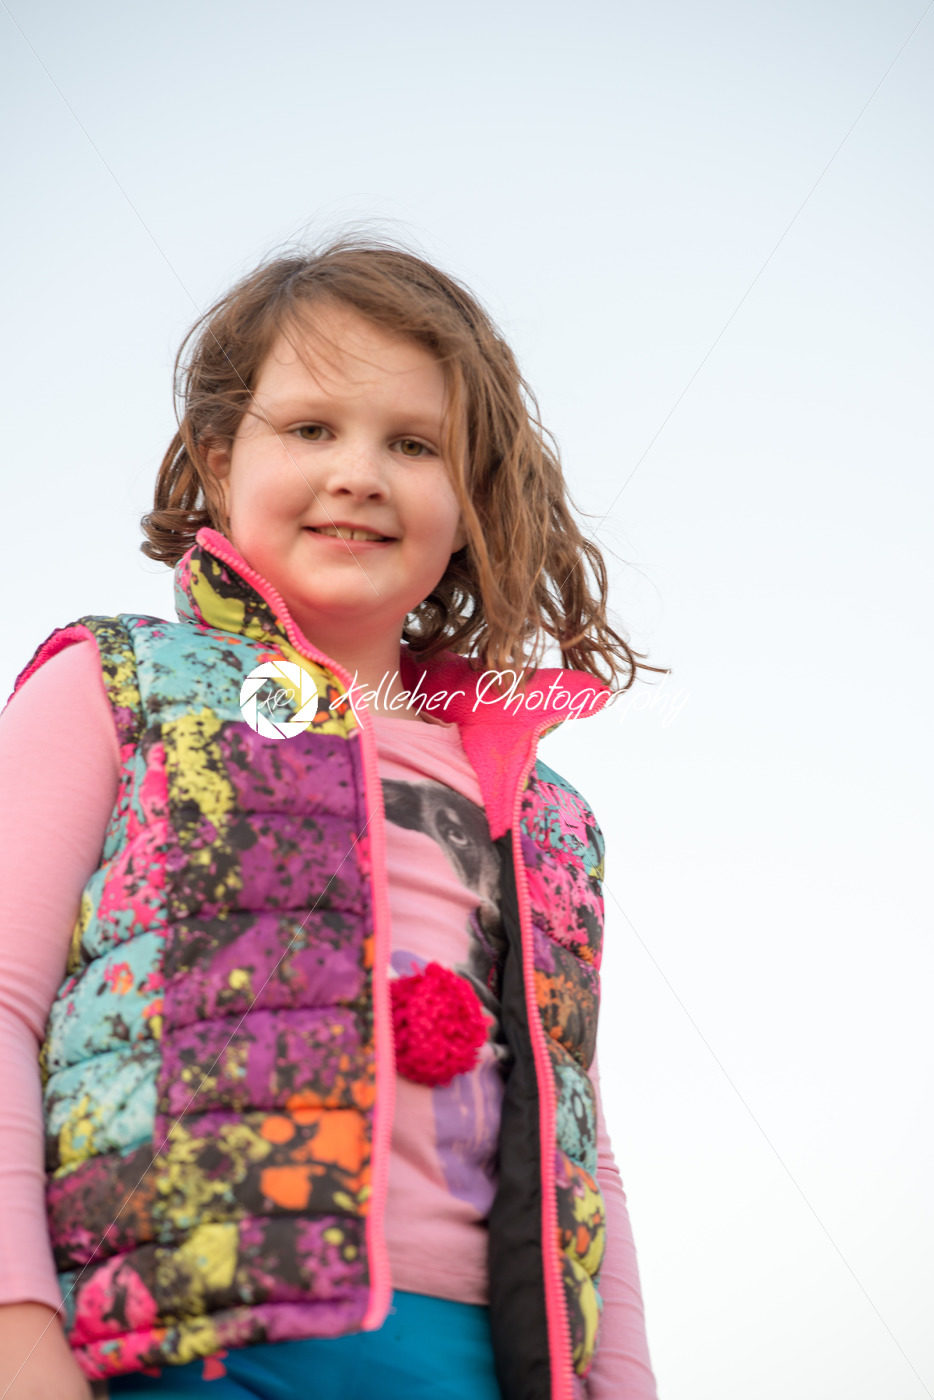 Beautiful young girl outside smiling at sunset golden hour - Kelleher Photography Store